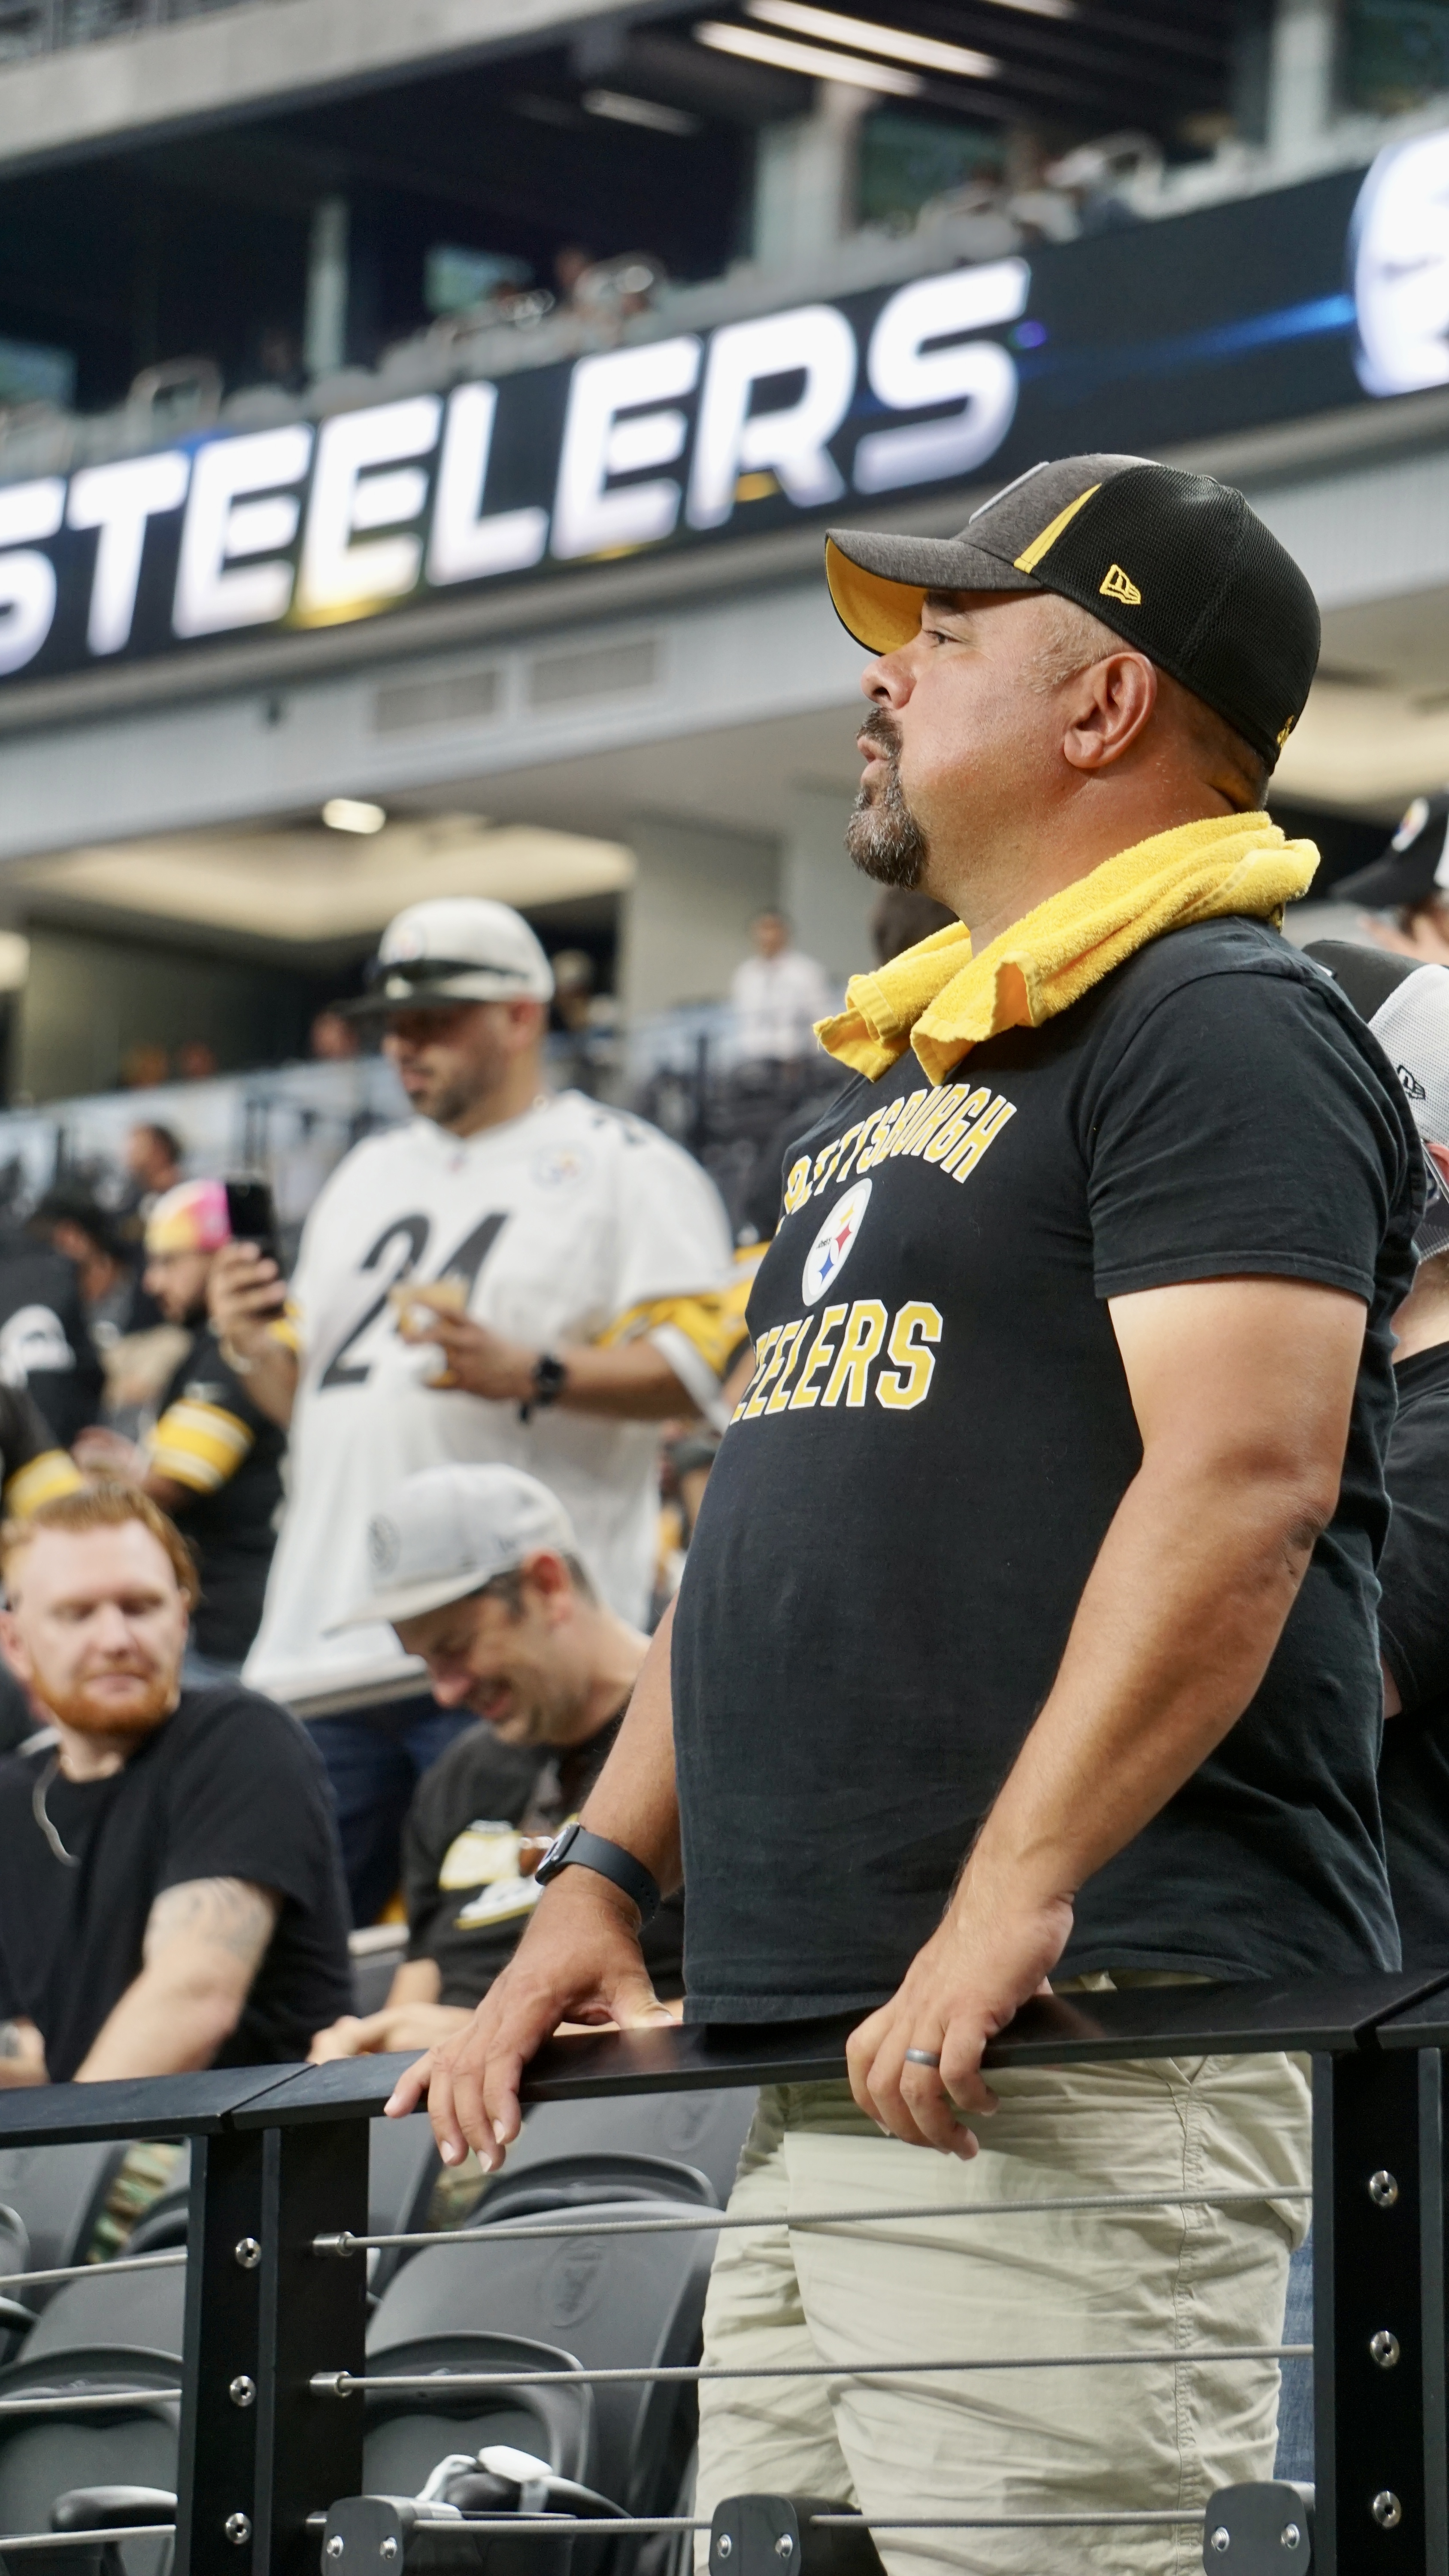 PHOTOS: Fans visit Las Vegas to see Steelers take on Raiders – WPXI